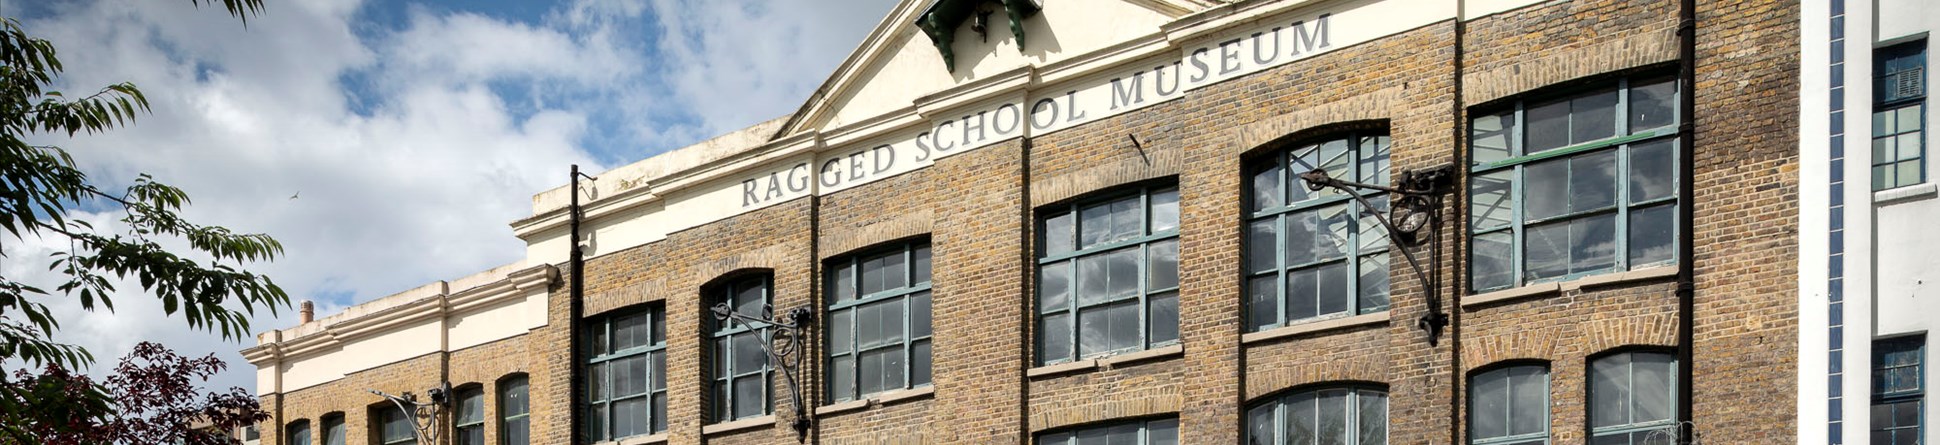 Former warehouse converted to school and now a museum